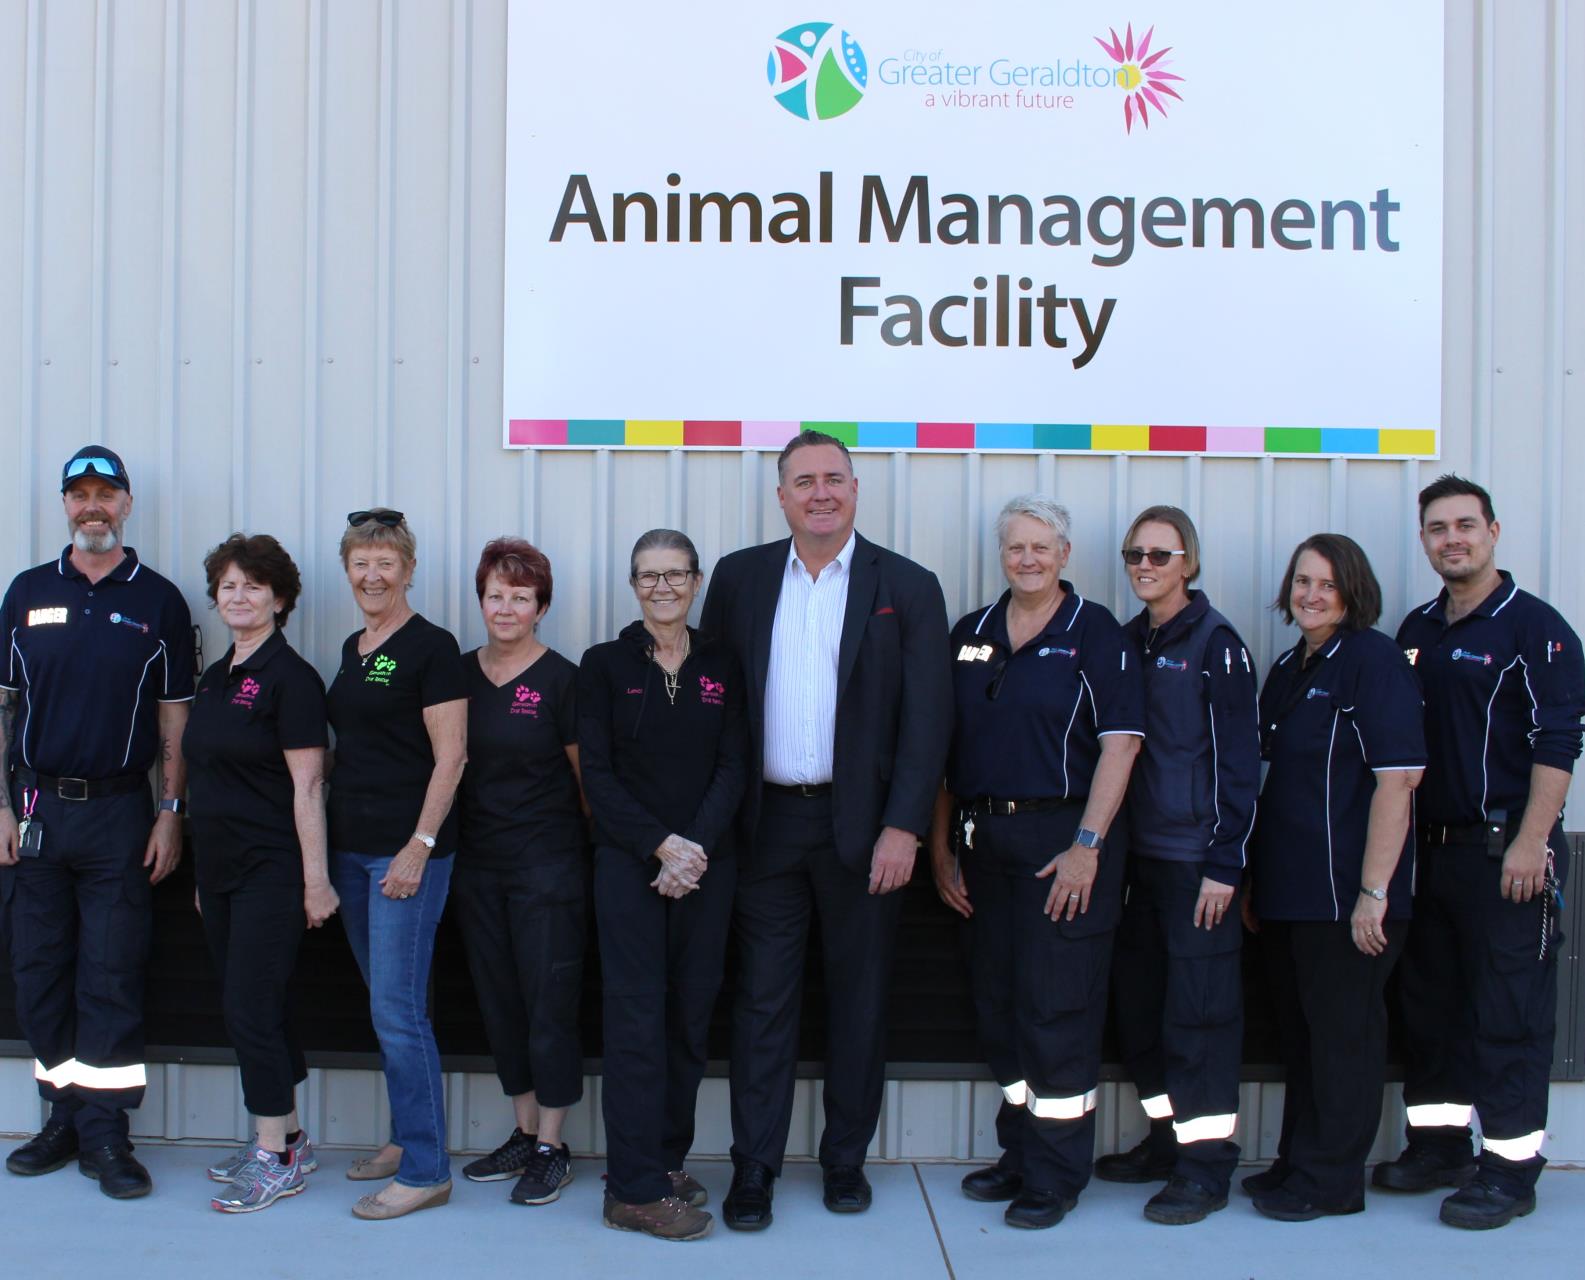 Mayor Van Styn (center) is joined by members of the Geraldton Dog Rescue and City Rangers to officially open the new Geraldton Animal Management Facility.